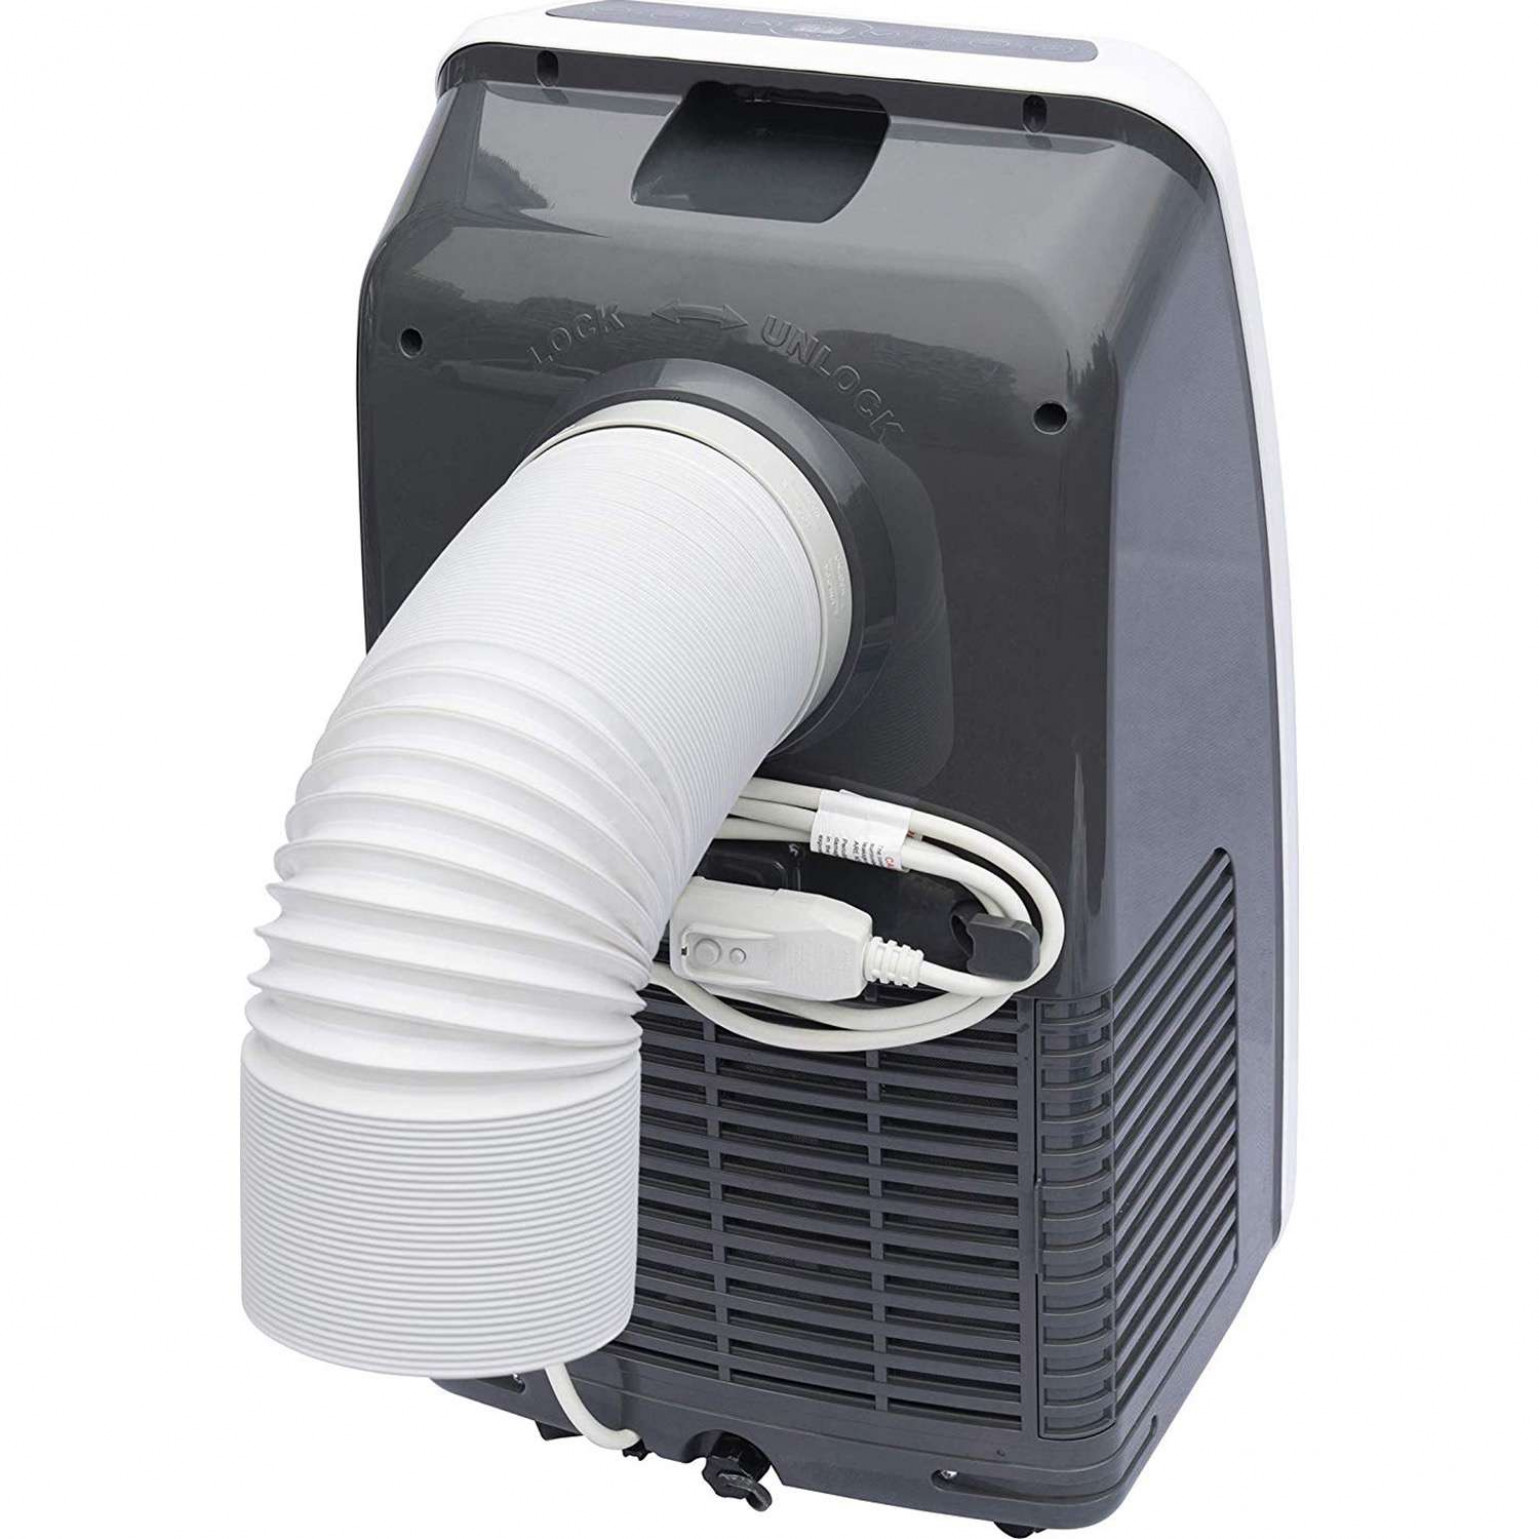 Does Portable Ac Use Outside Air